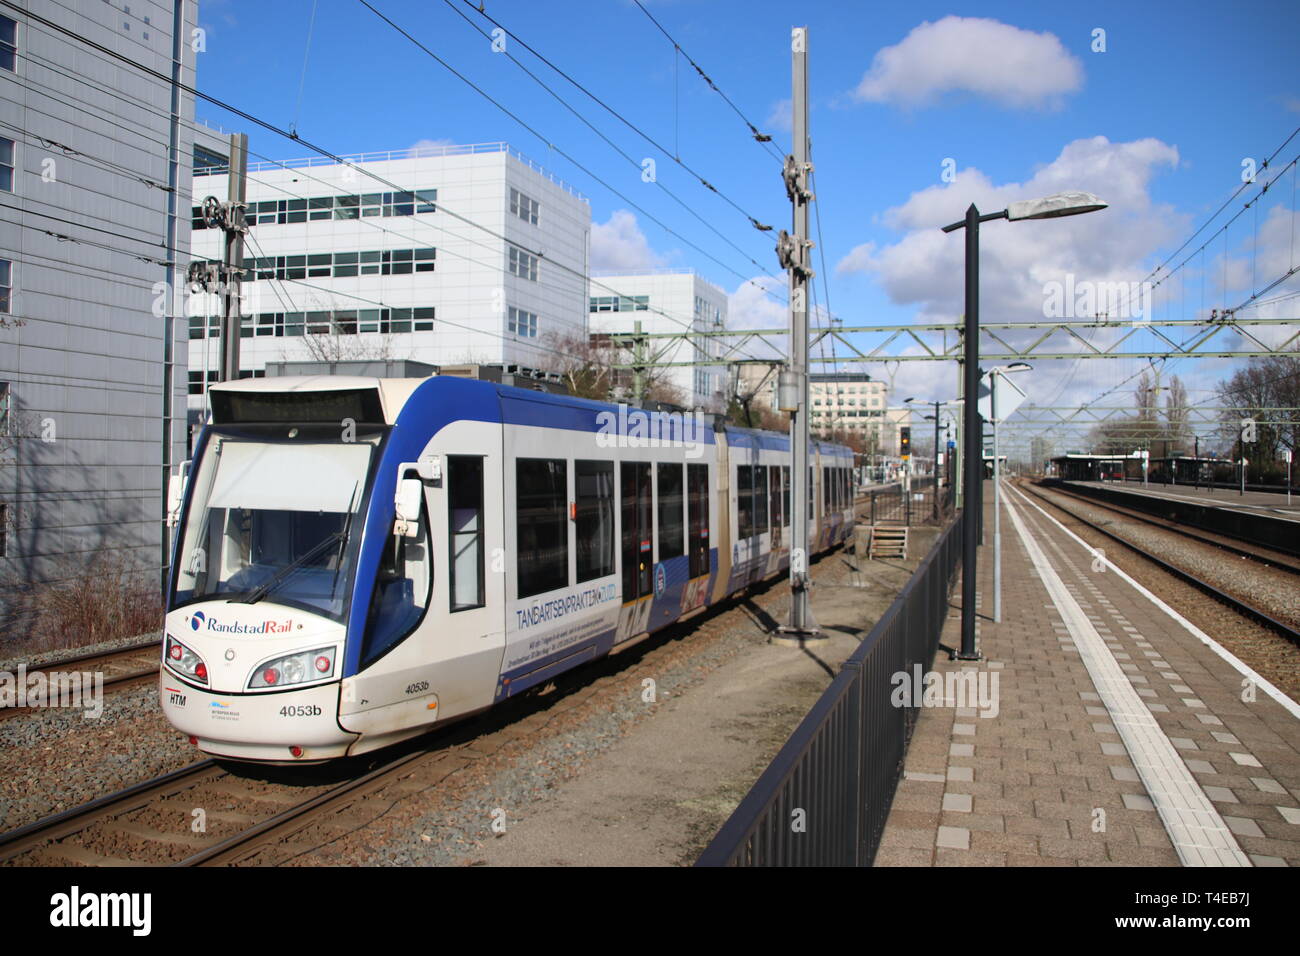 Regio Citads tram vehicle on the rails for Randstadrail in The Hague operated by HTM at station Den Haag Laan van Noi Stock Photo